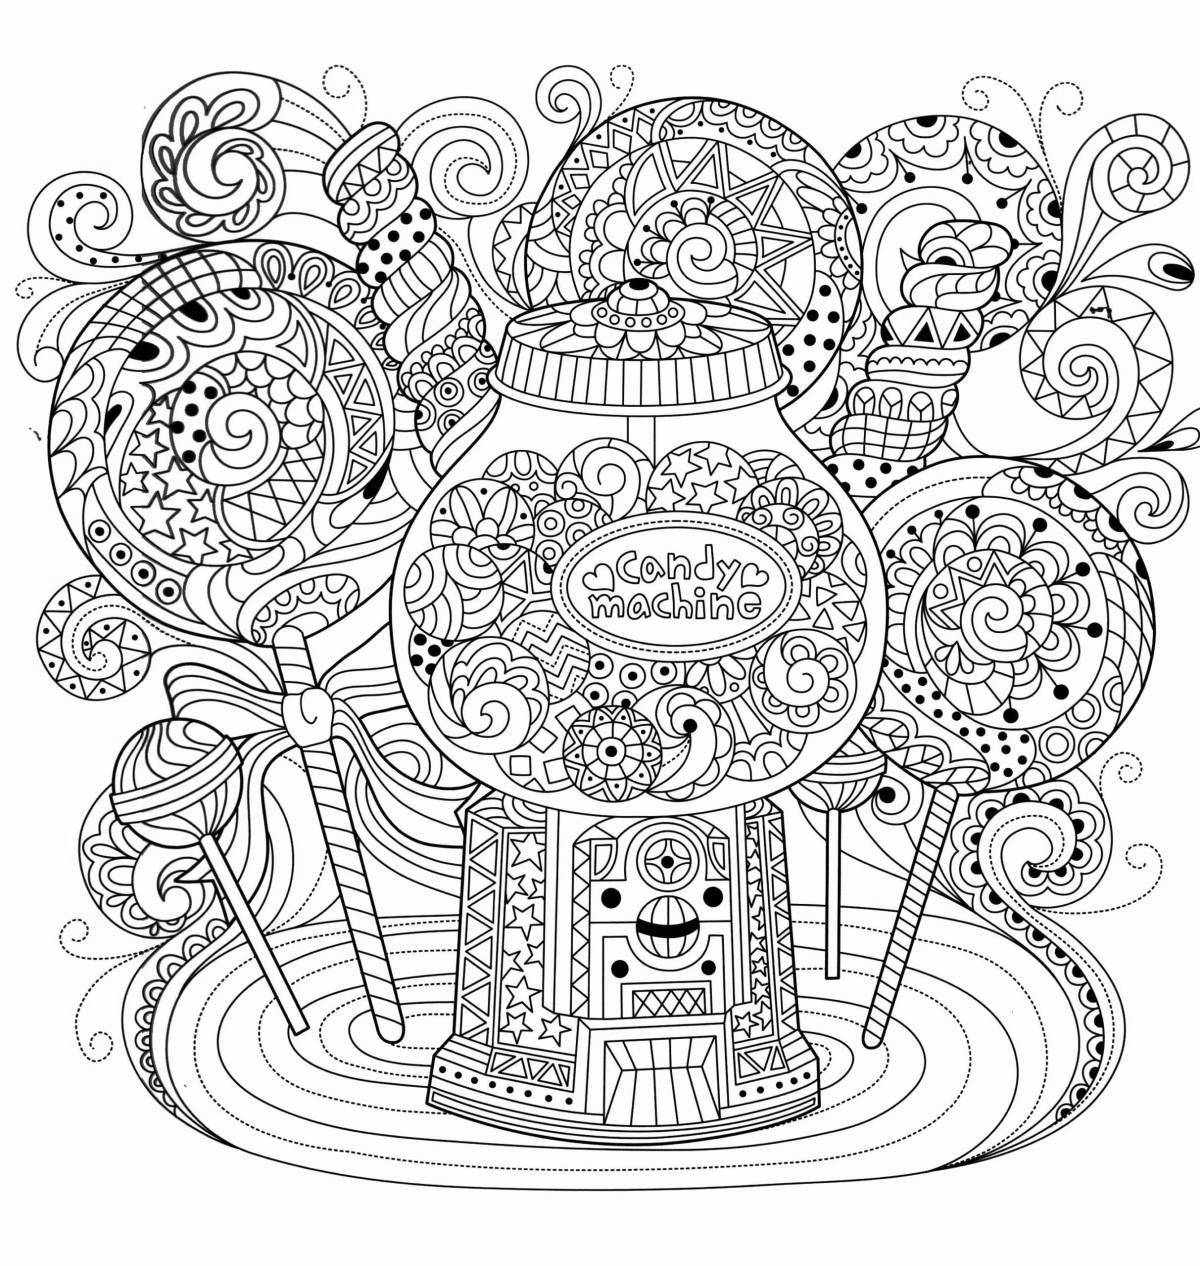 Magic anti-stress coloring book for adults